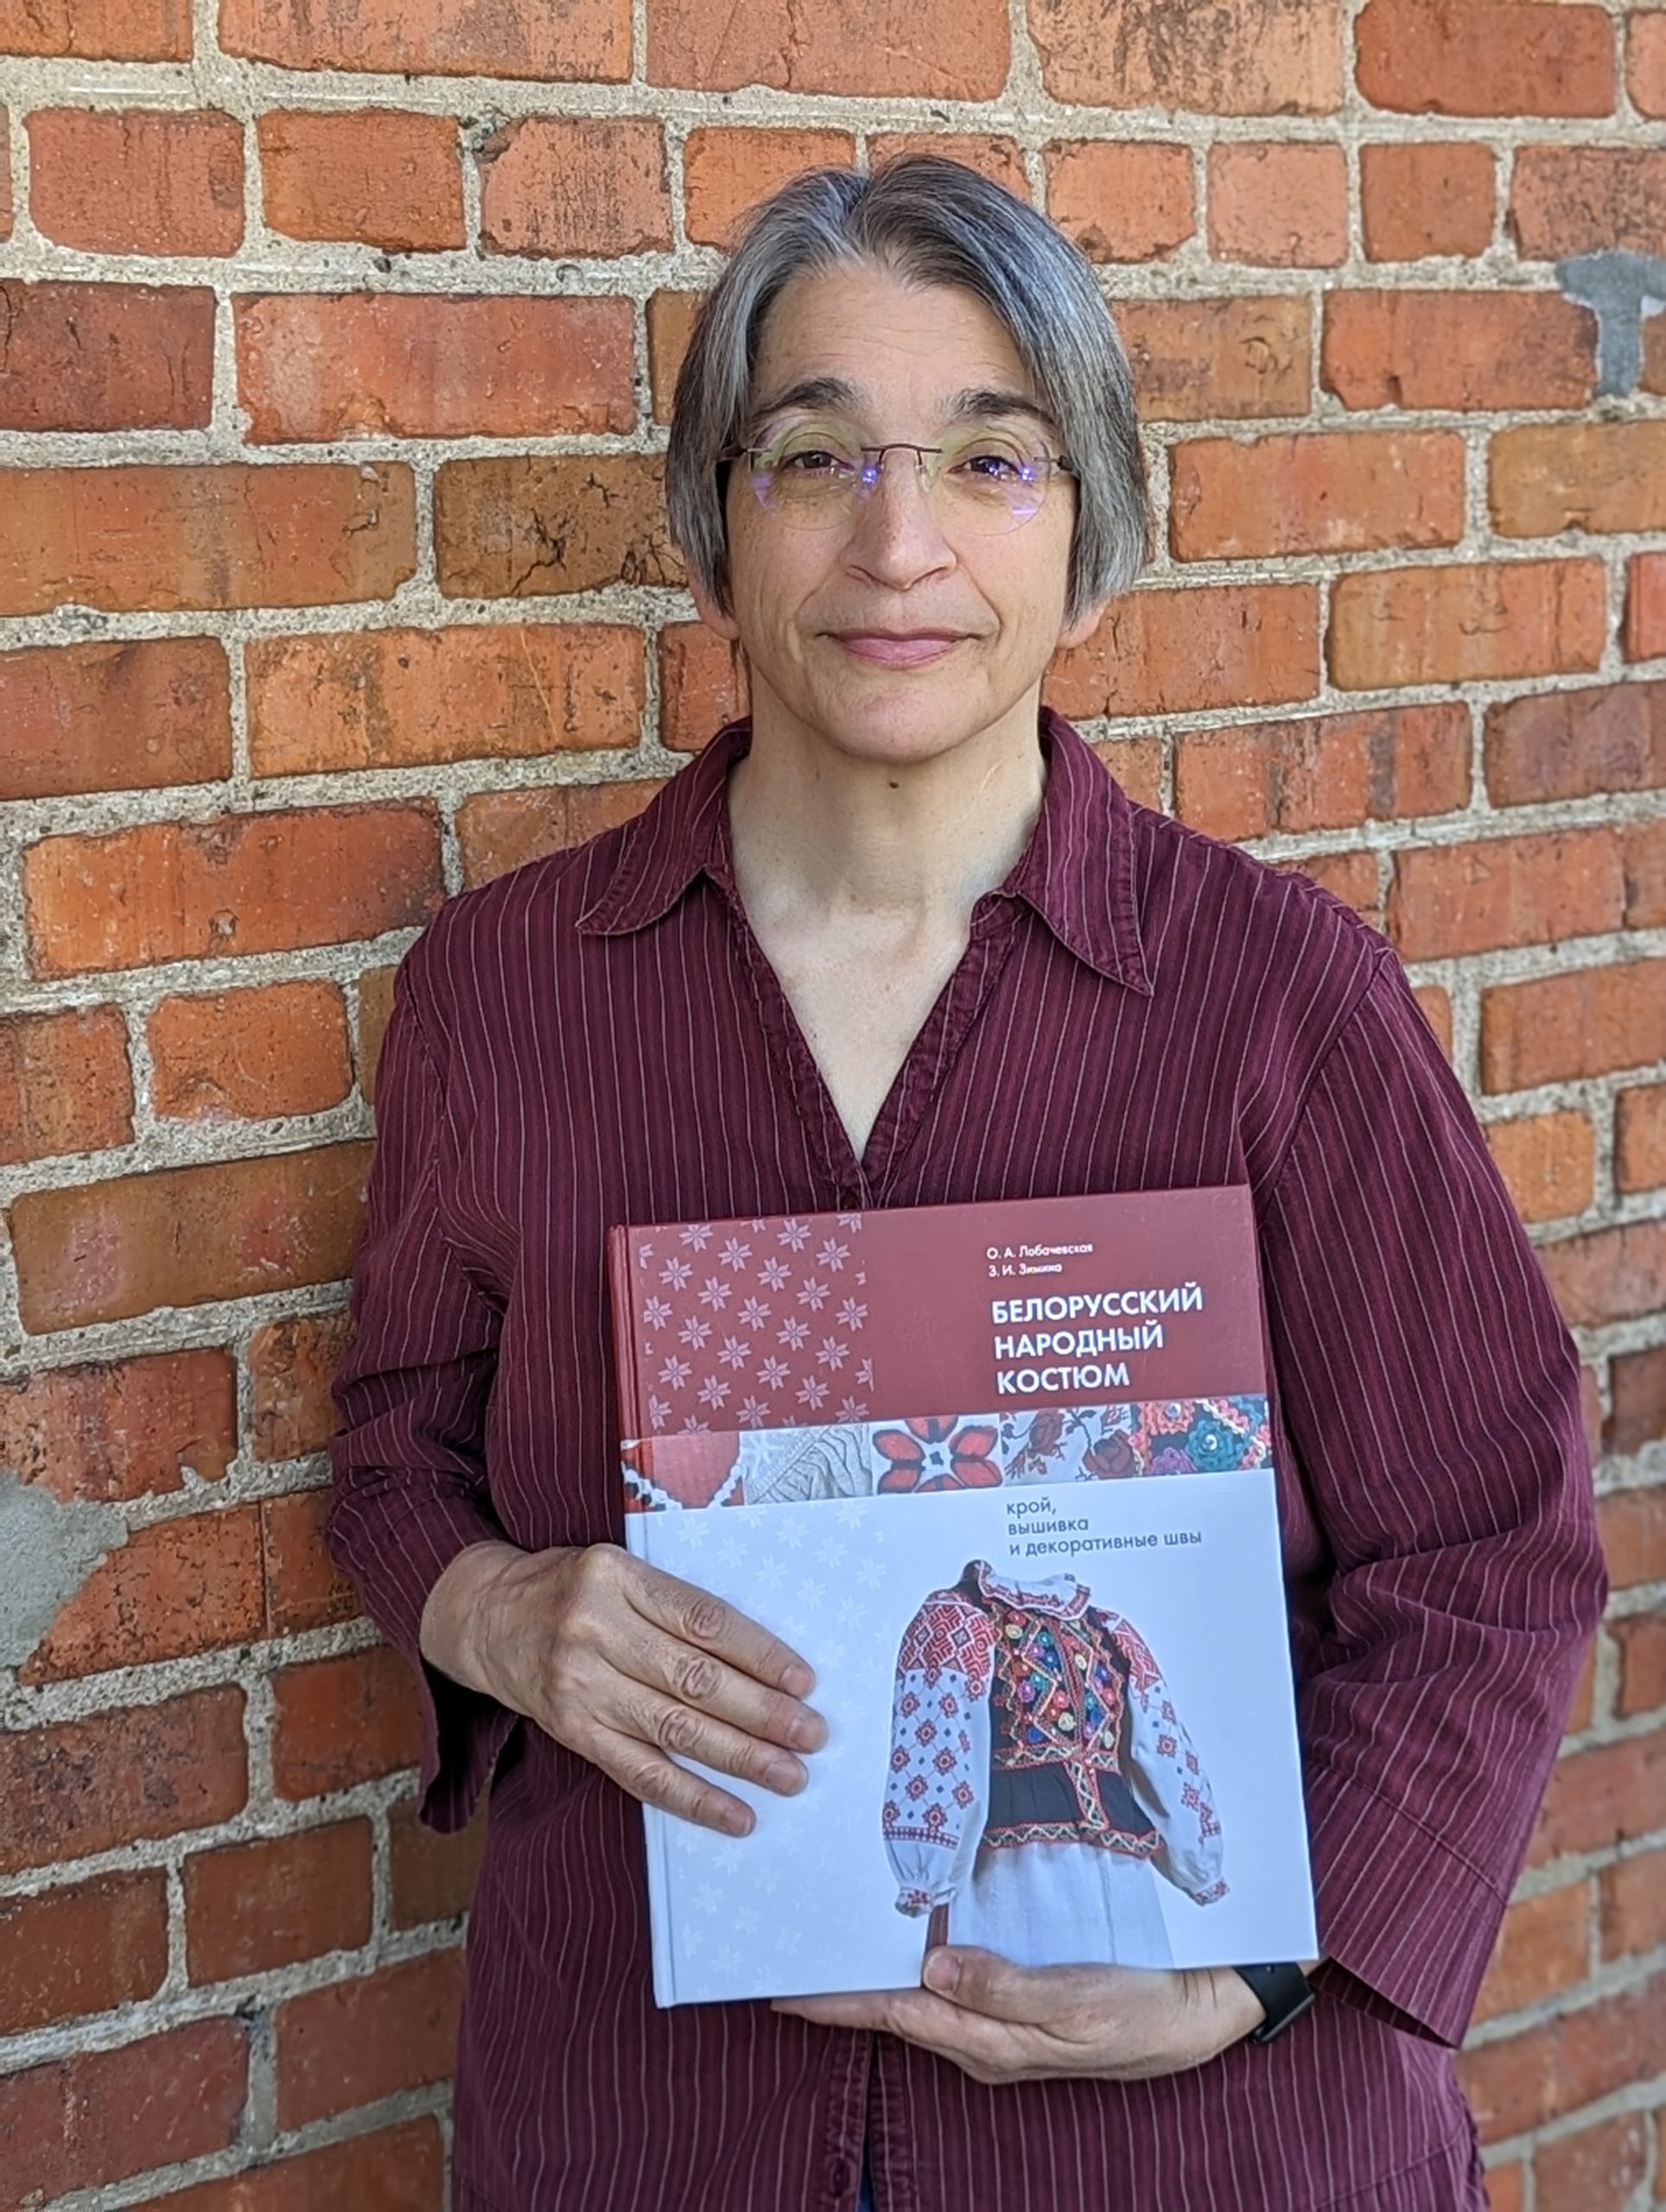 White woman with gray hair in a maroon shirt, holding a book about folk dresses.